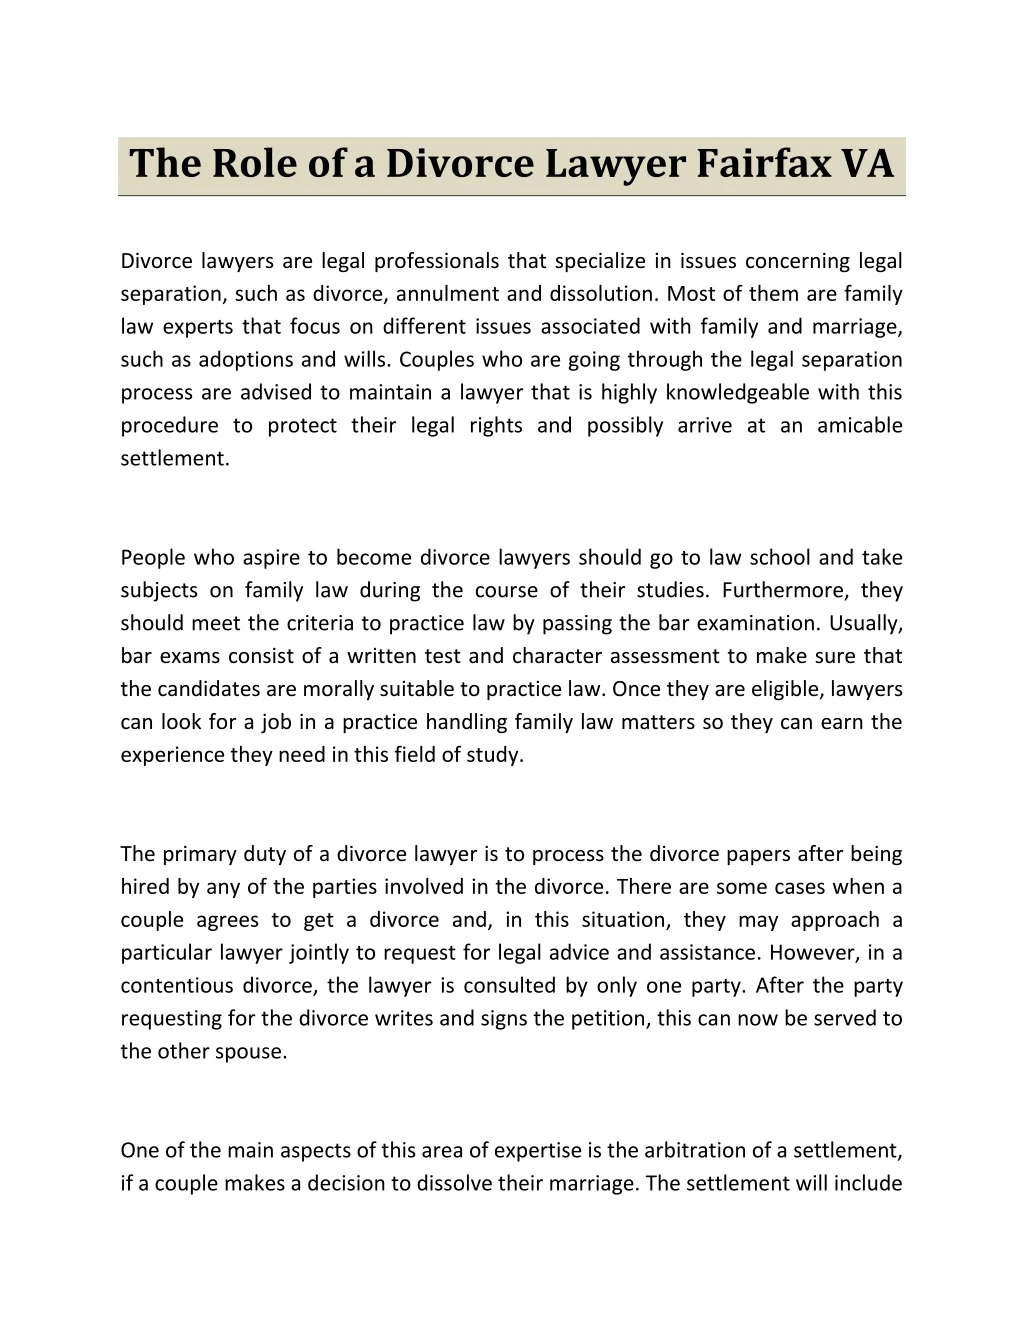 the role of a divorce lawyer fairfax va